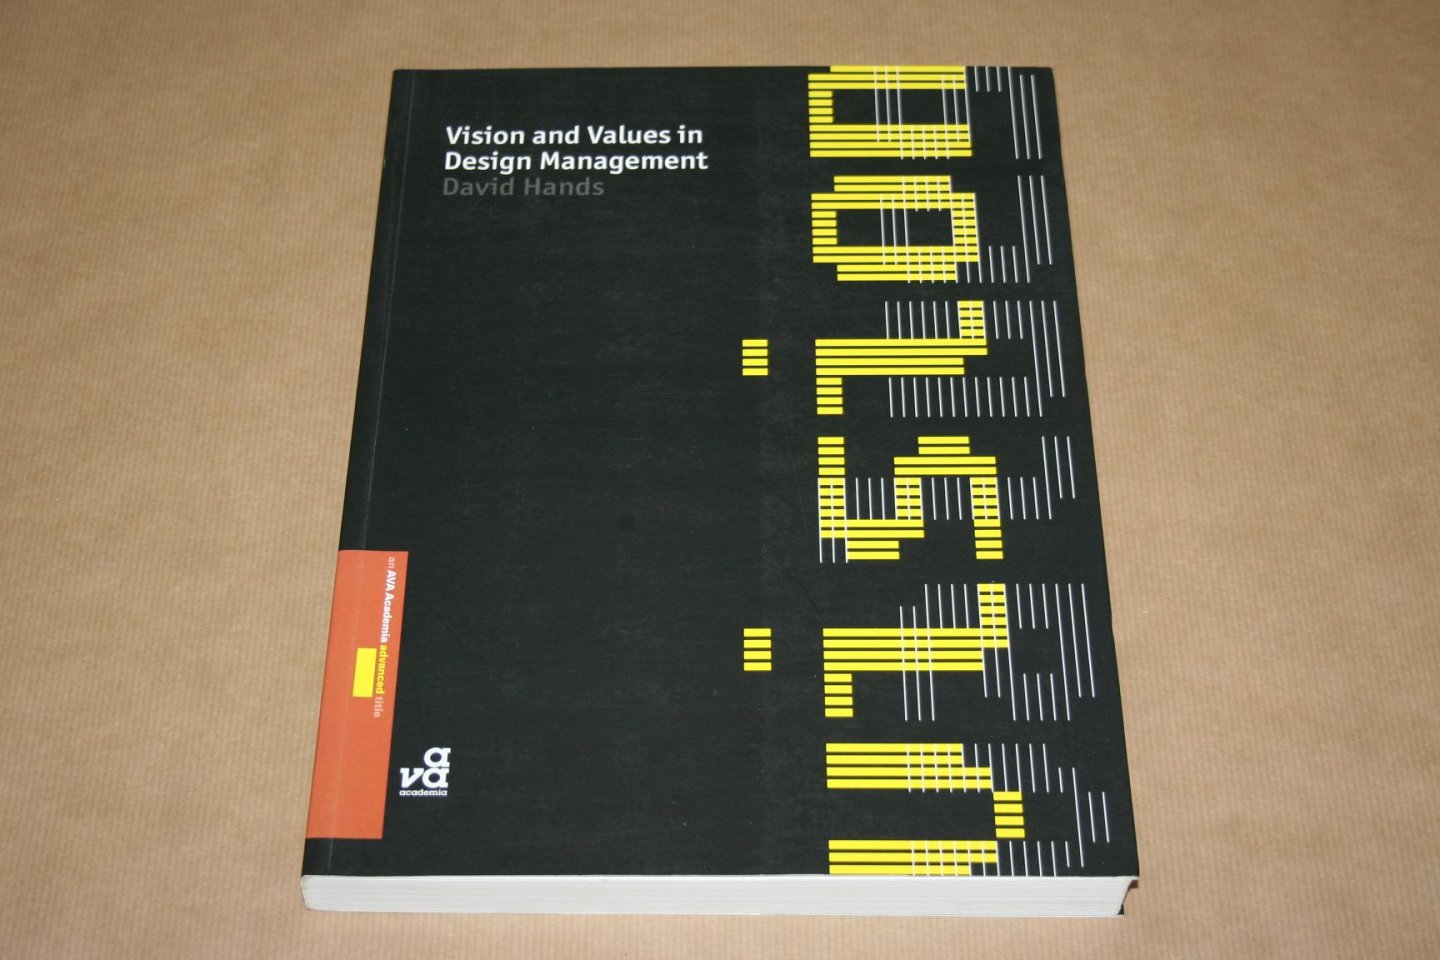 David Hands - Vision and Values in Design Management